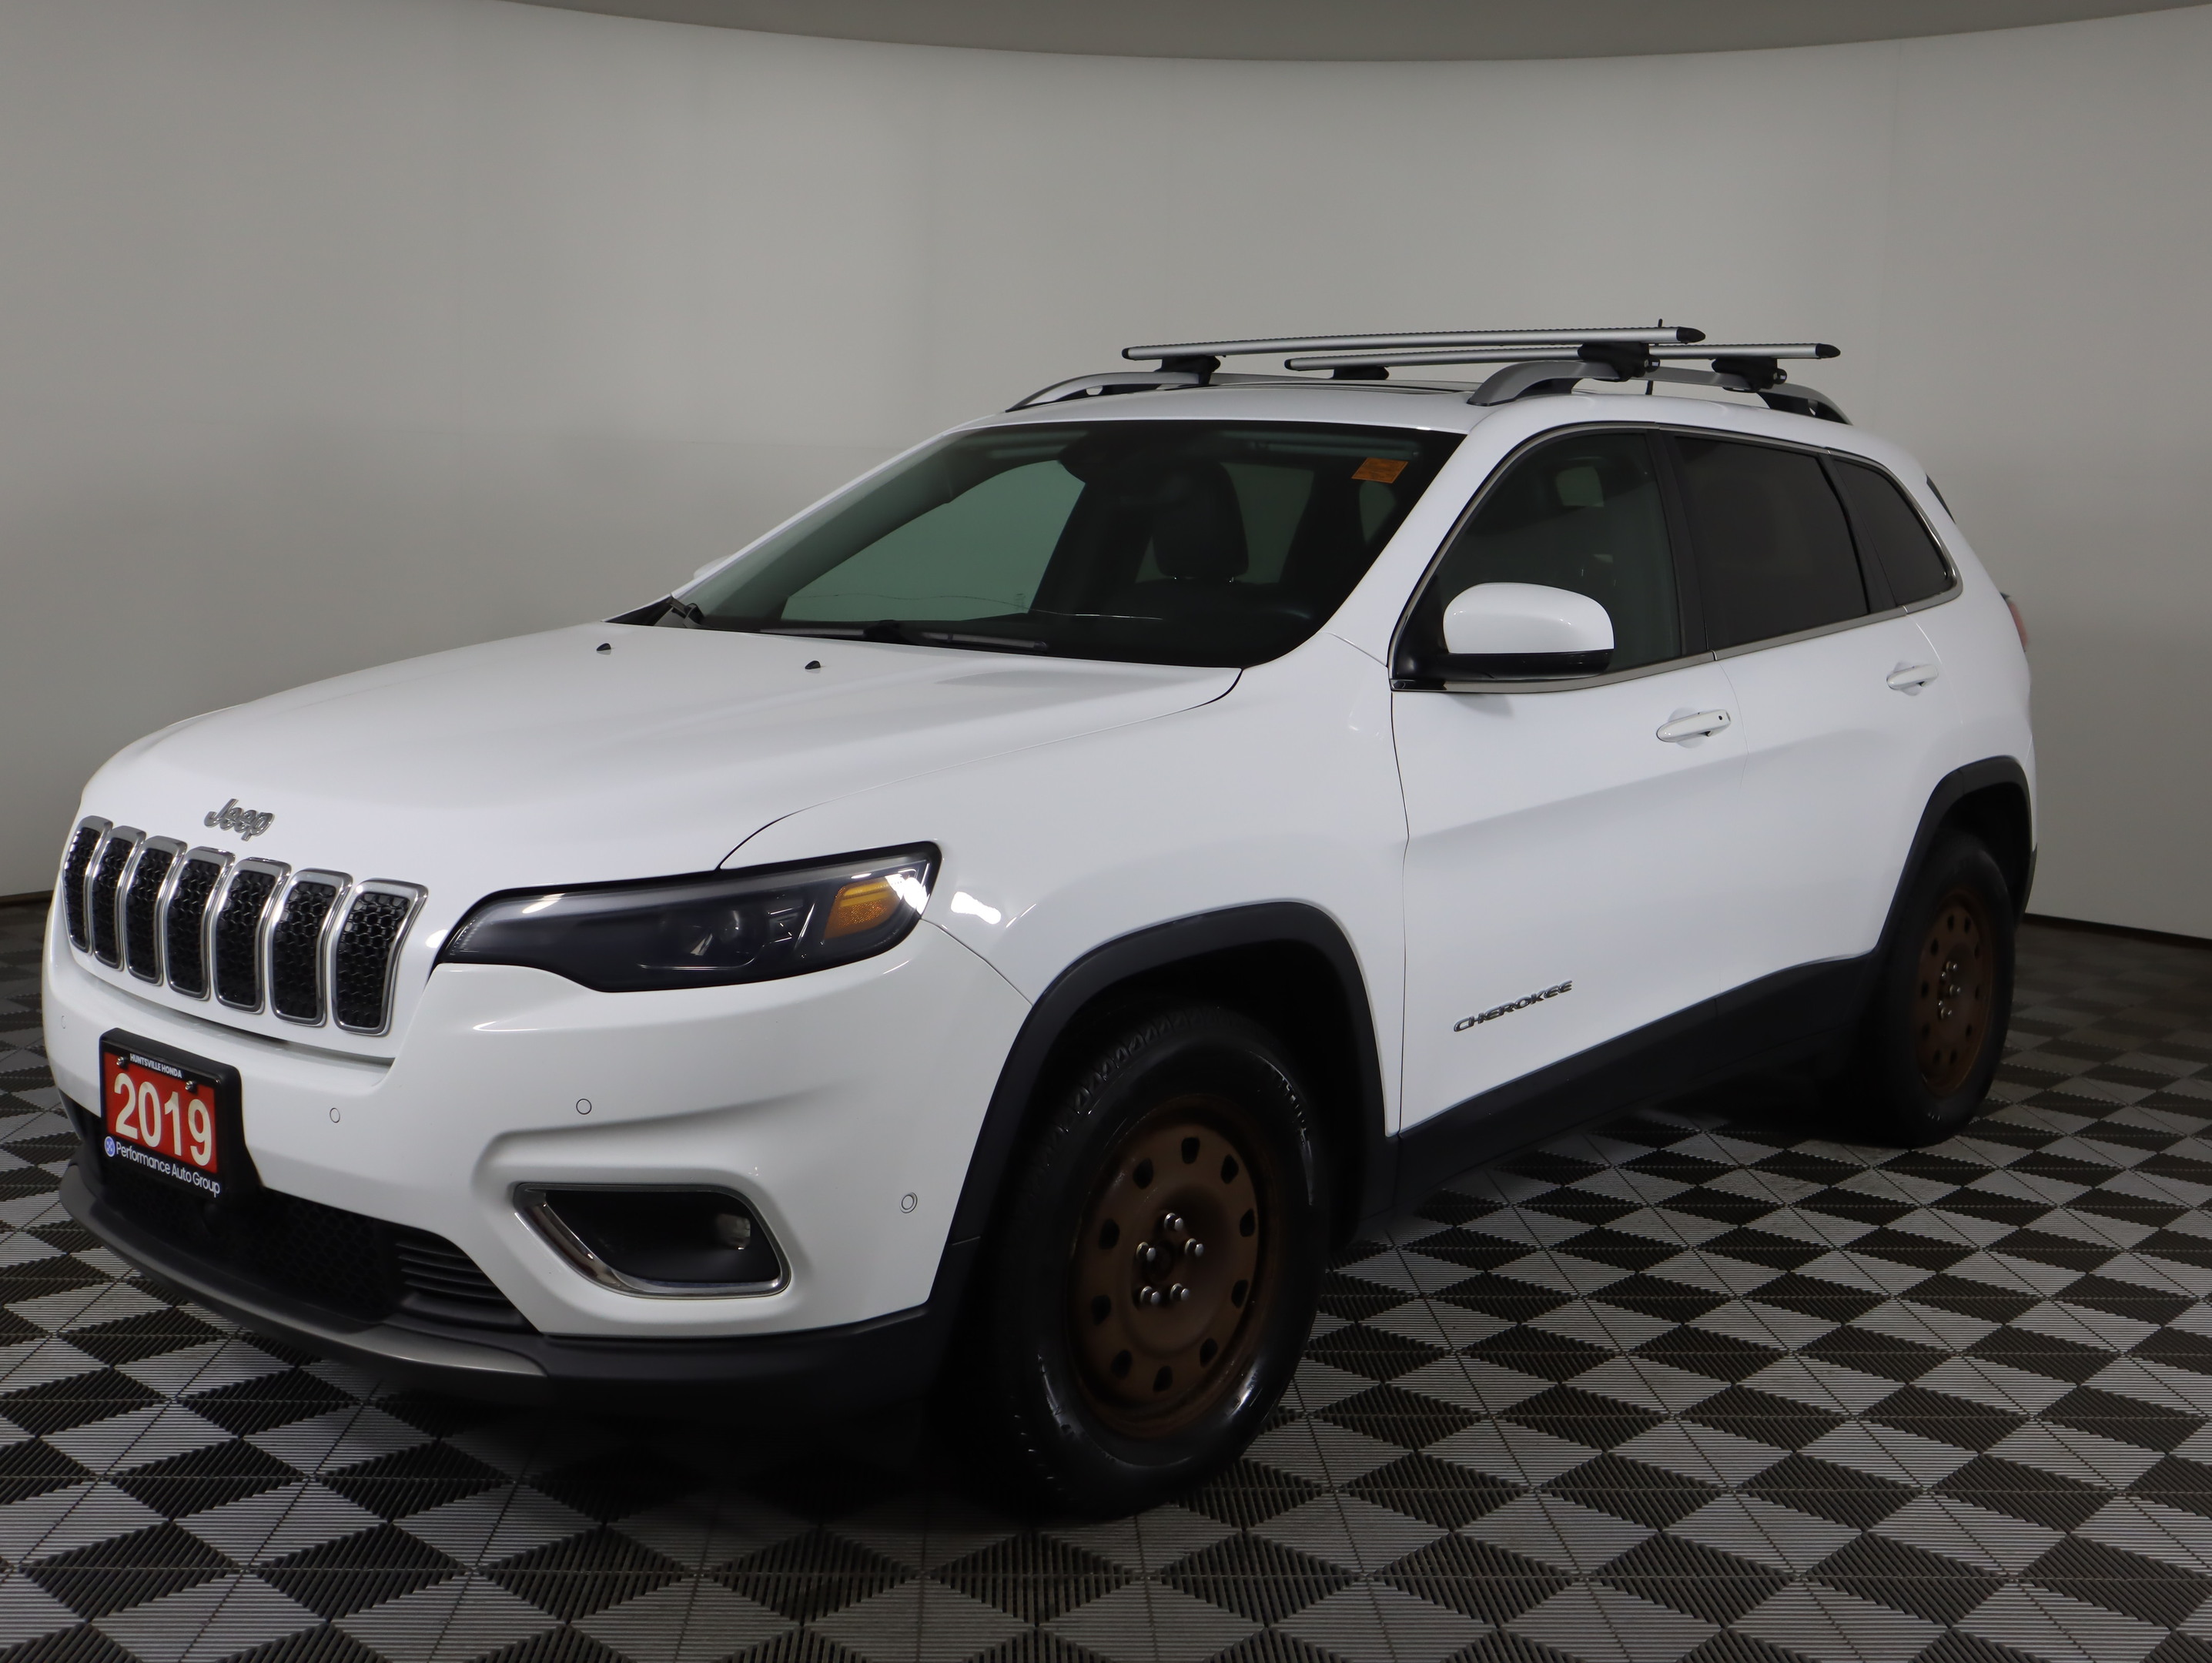 2019 Jeep Cherokee Limited-3.2L-4WD- Leather-Navigation- Remote Start